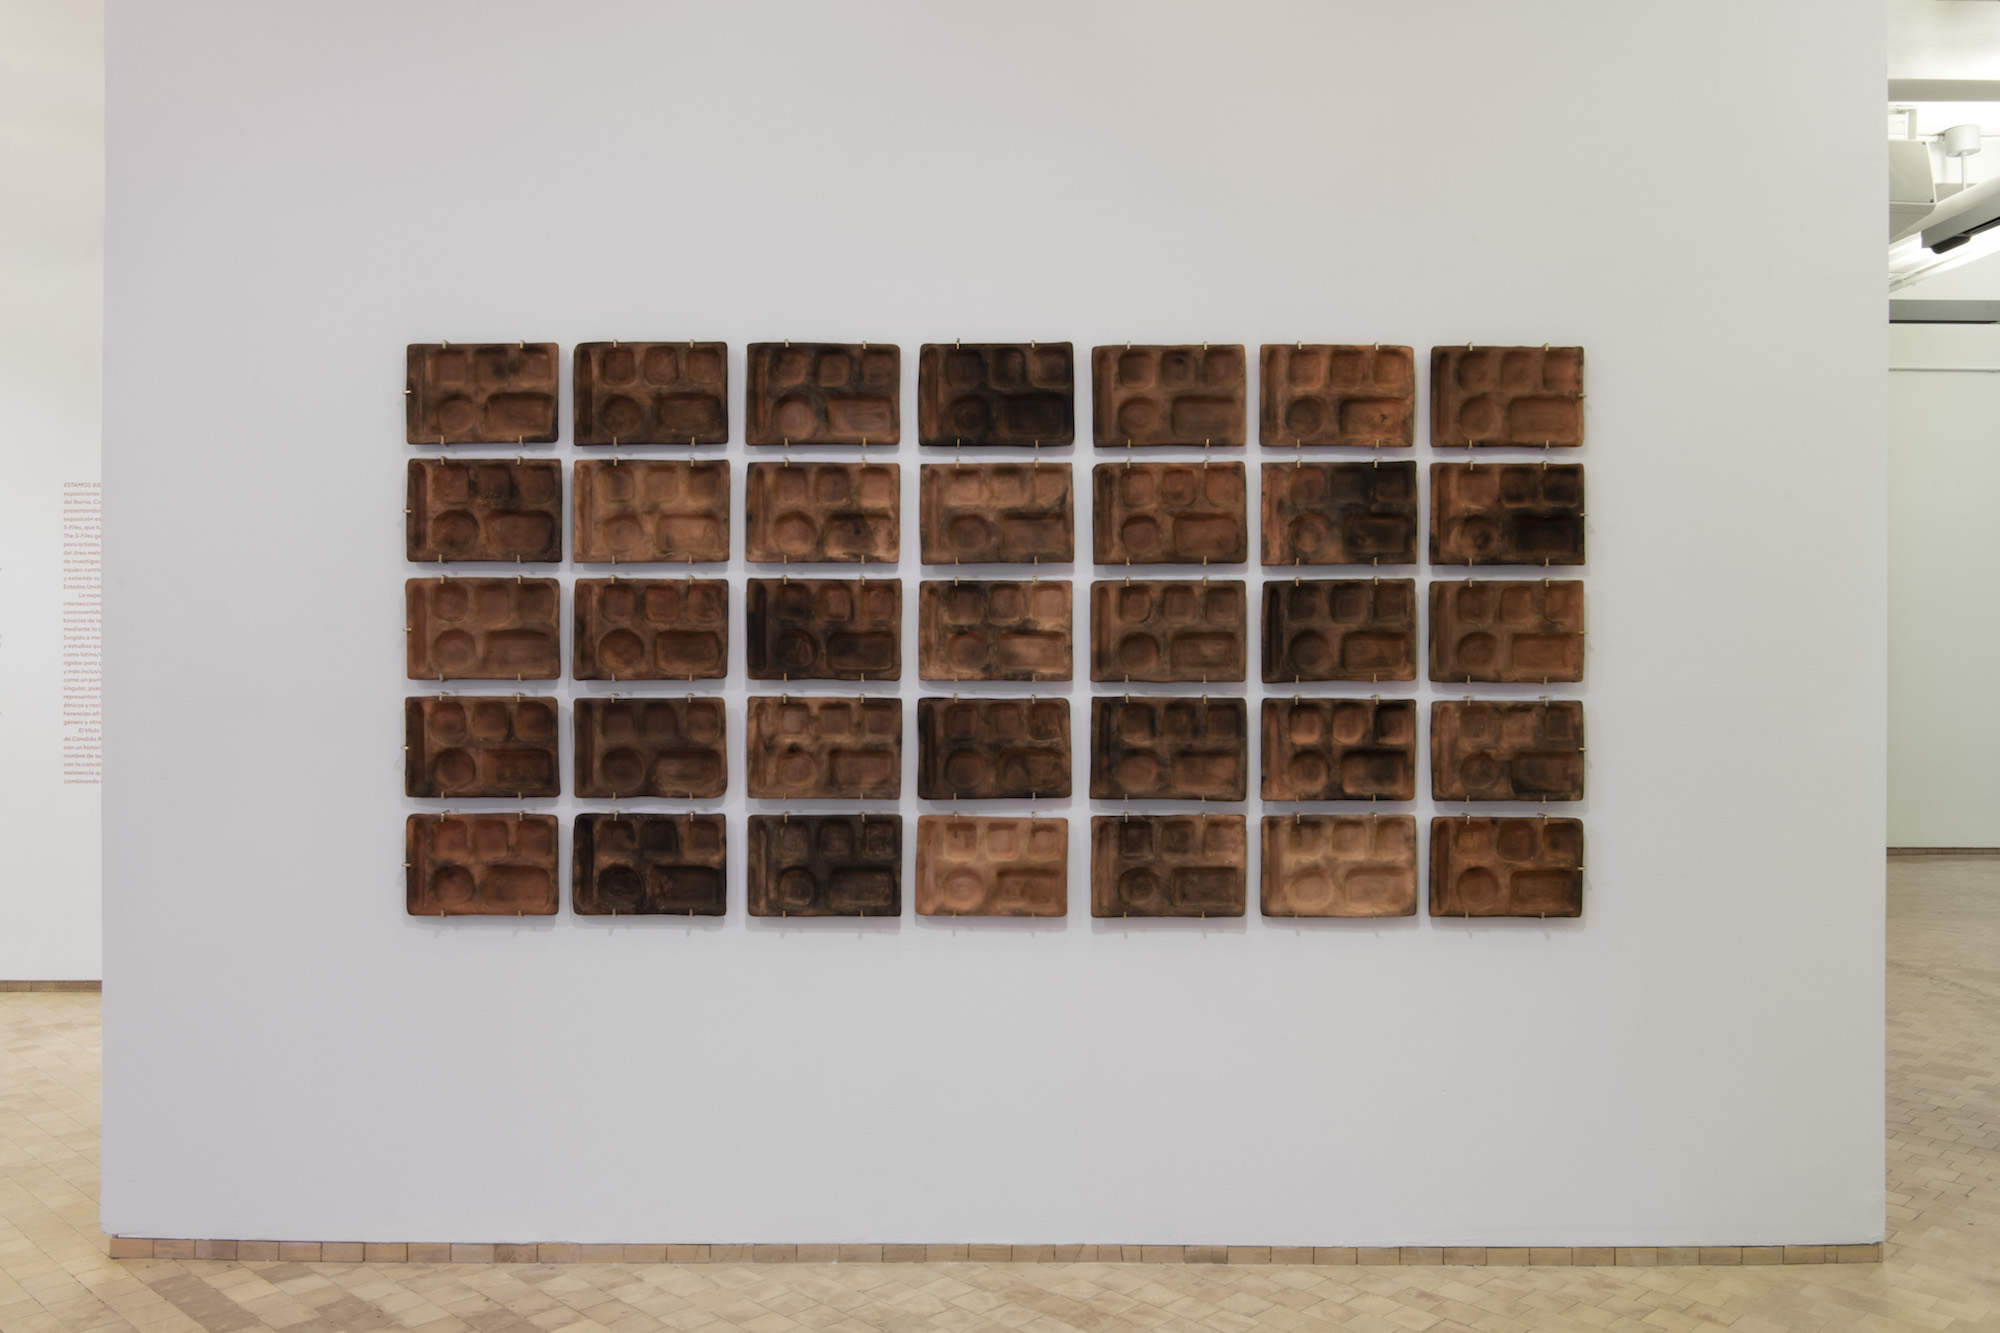 Art Installation is presented on white gallery walls. Various brown ceramic trays are displayed in a rectangular grid.